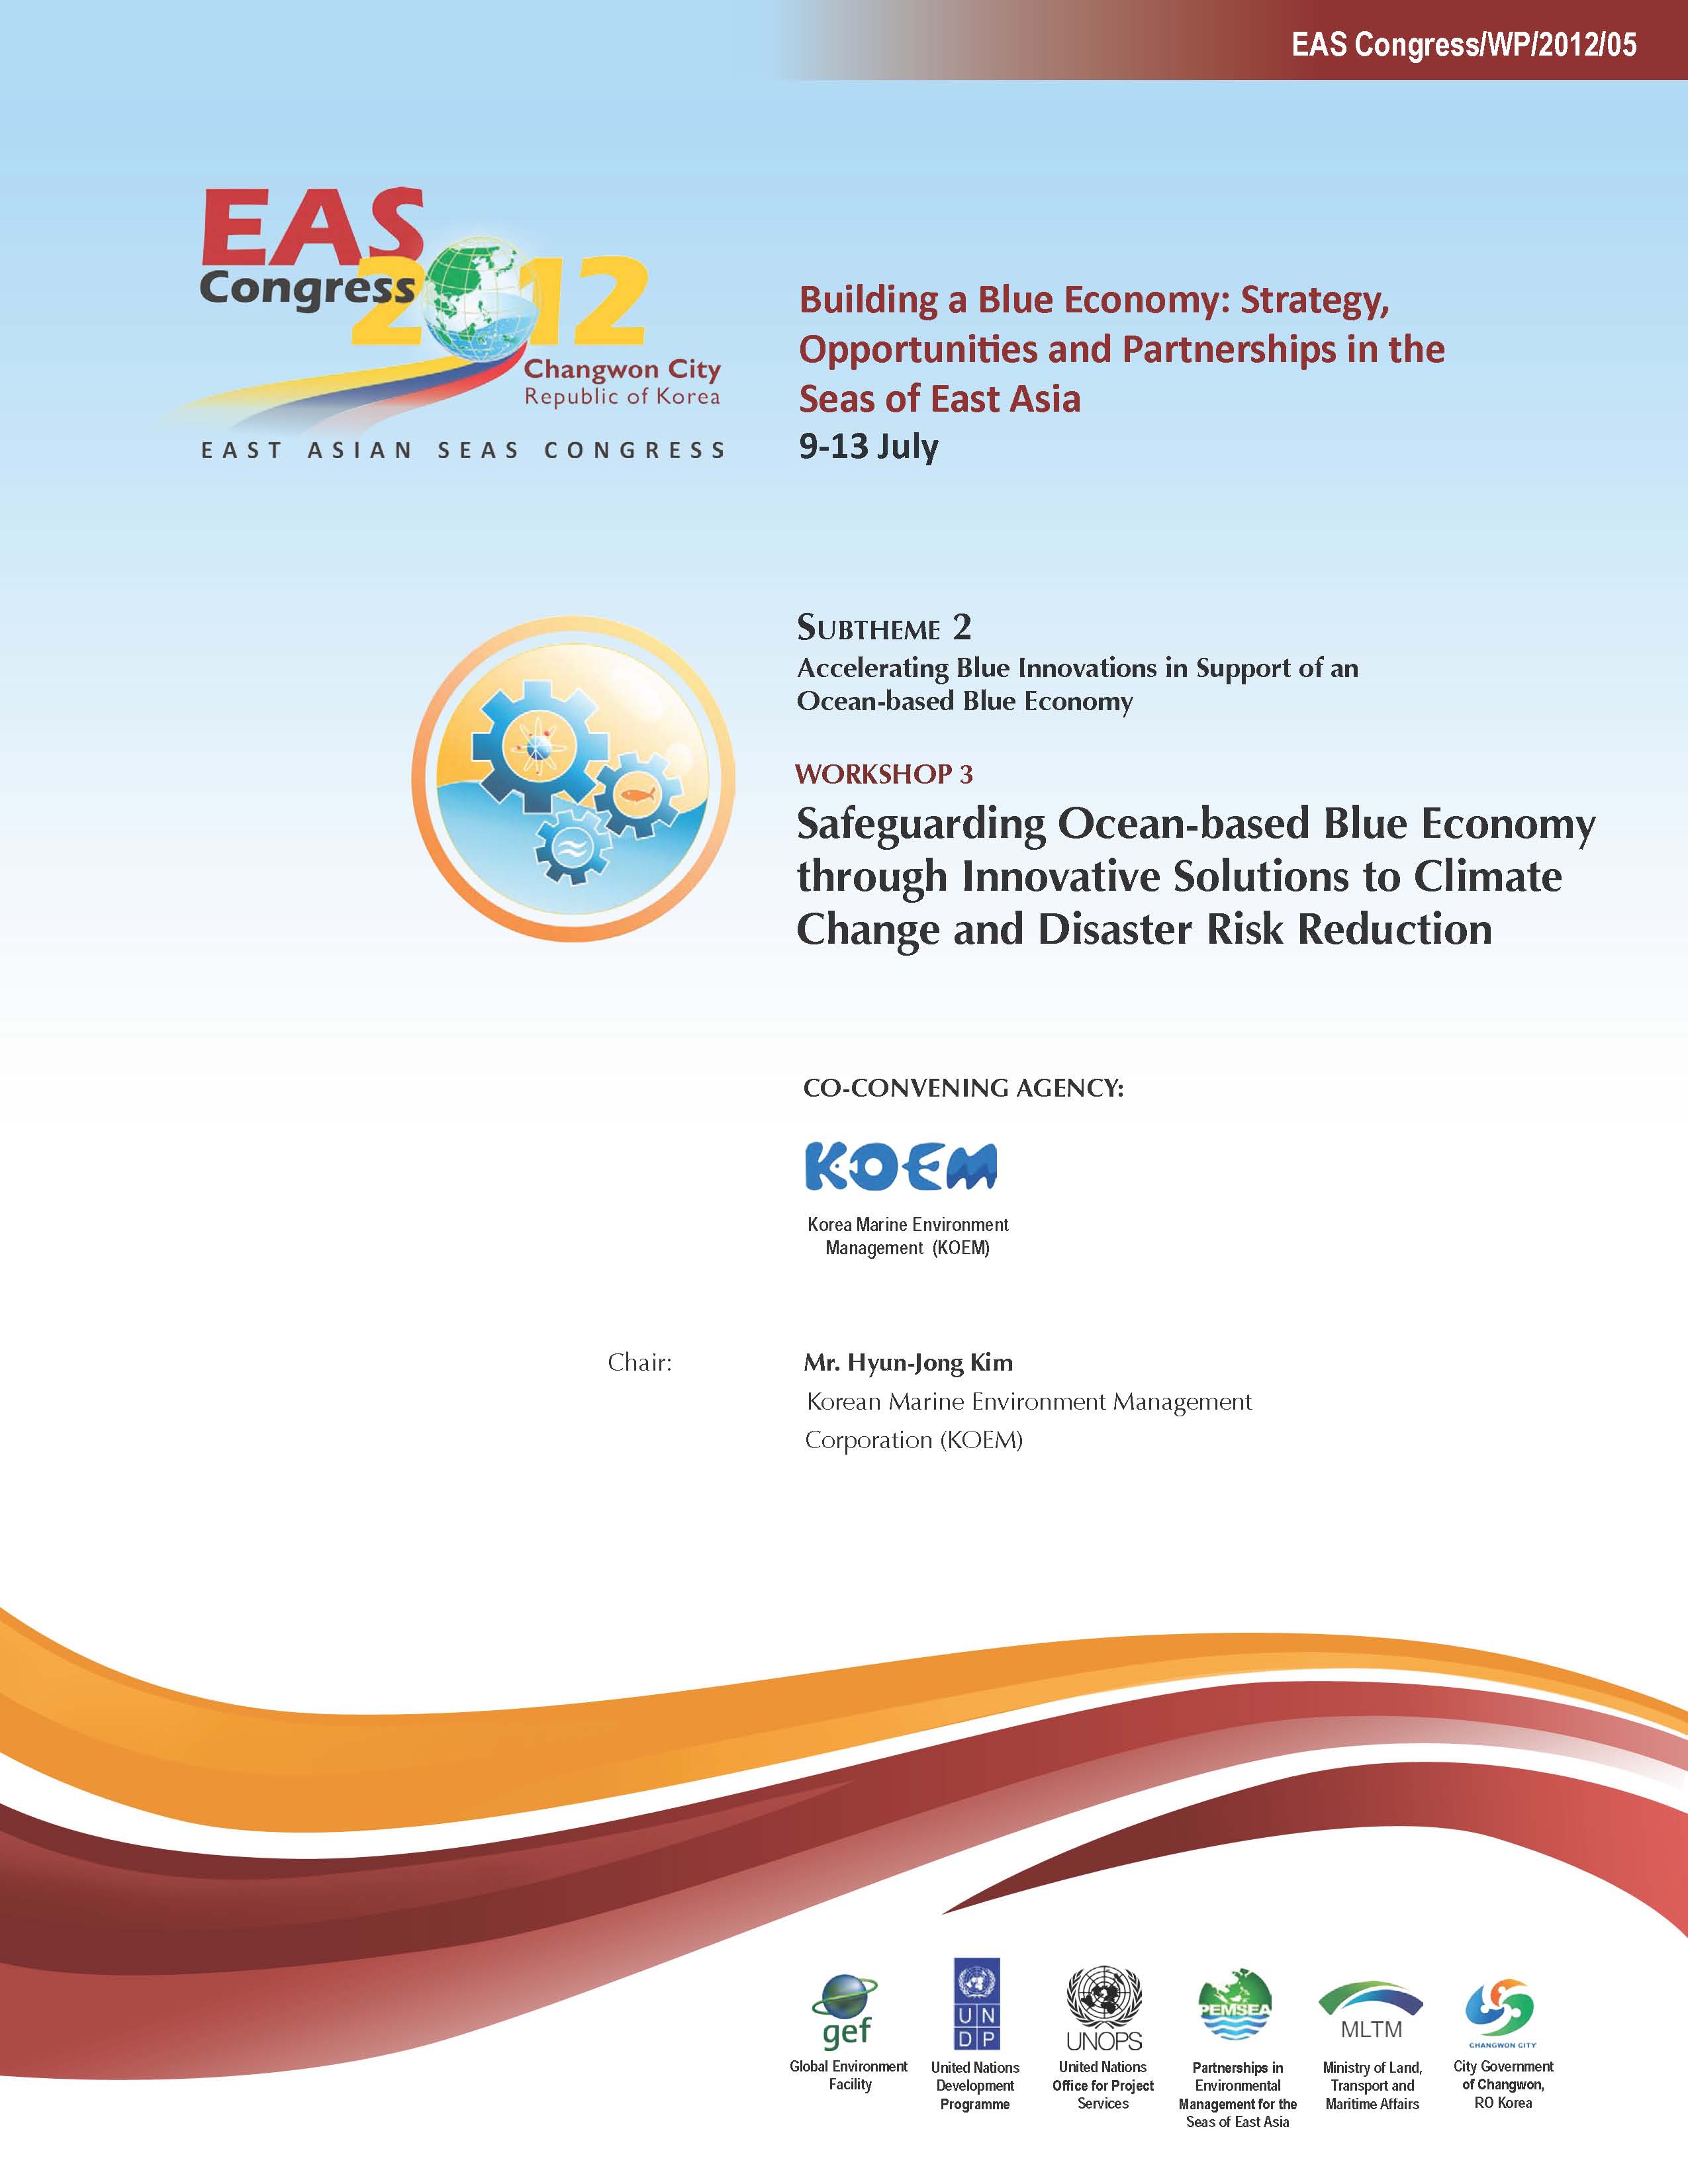 Proceedings of the Workshop on Safeguarding Ocean-based Blue Economy through Innovative Solutions to Climate Change and Disaster Risk Reduction